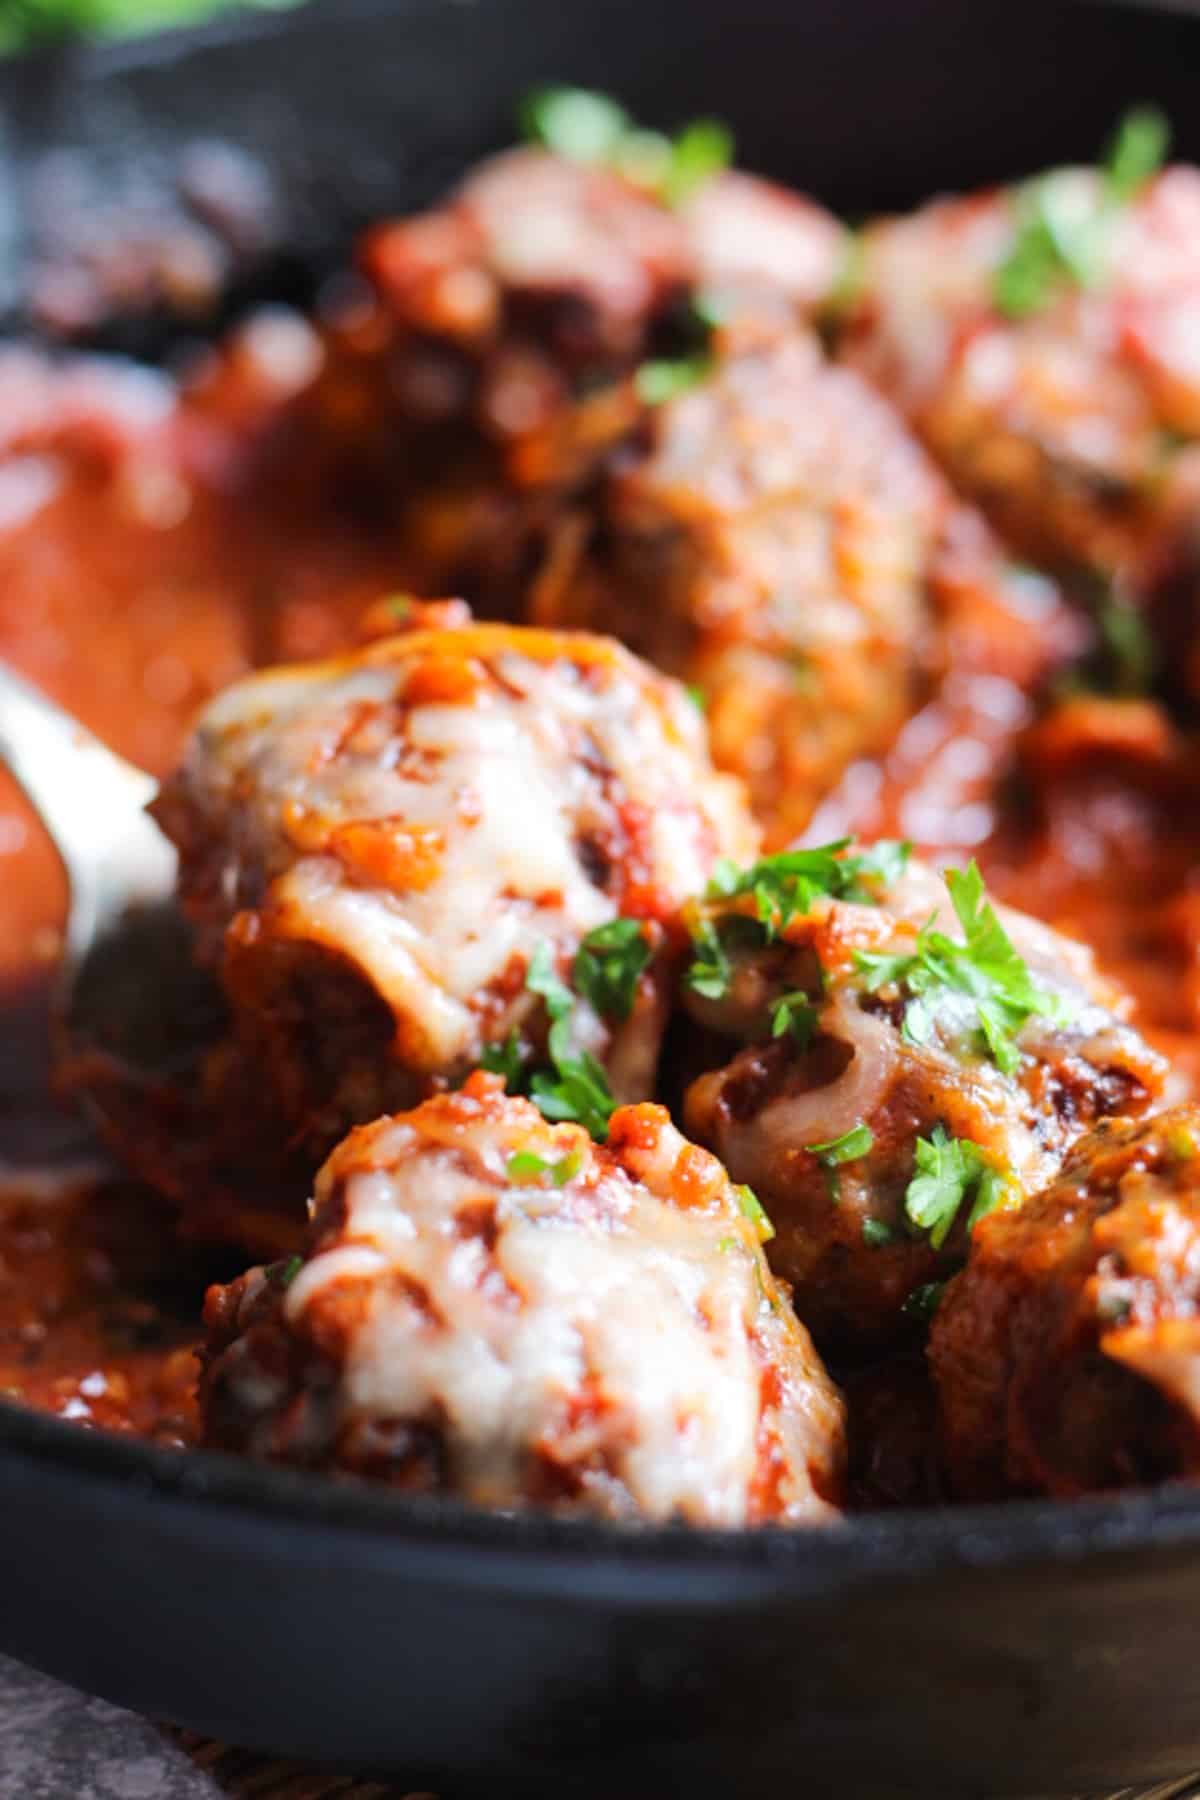 This easy Italian meatball recipe is perfect for a weeknight dinner. The juicy beef meatballs are cooked in a delicious sauce for a satisfying meal.